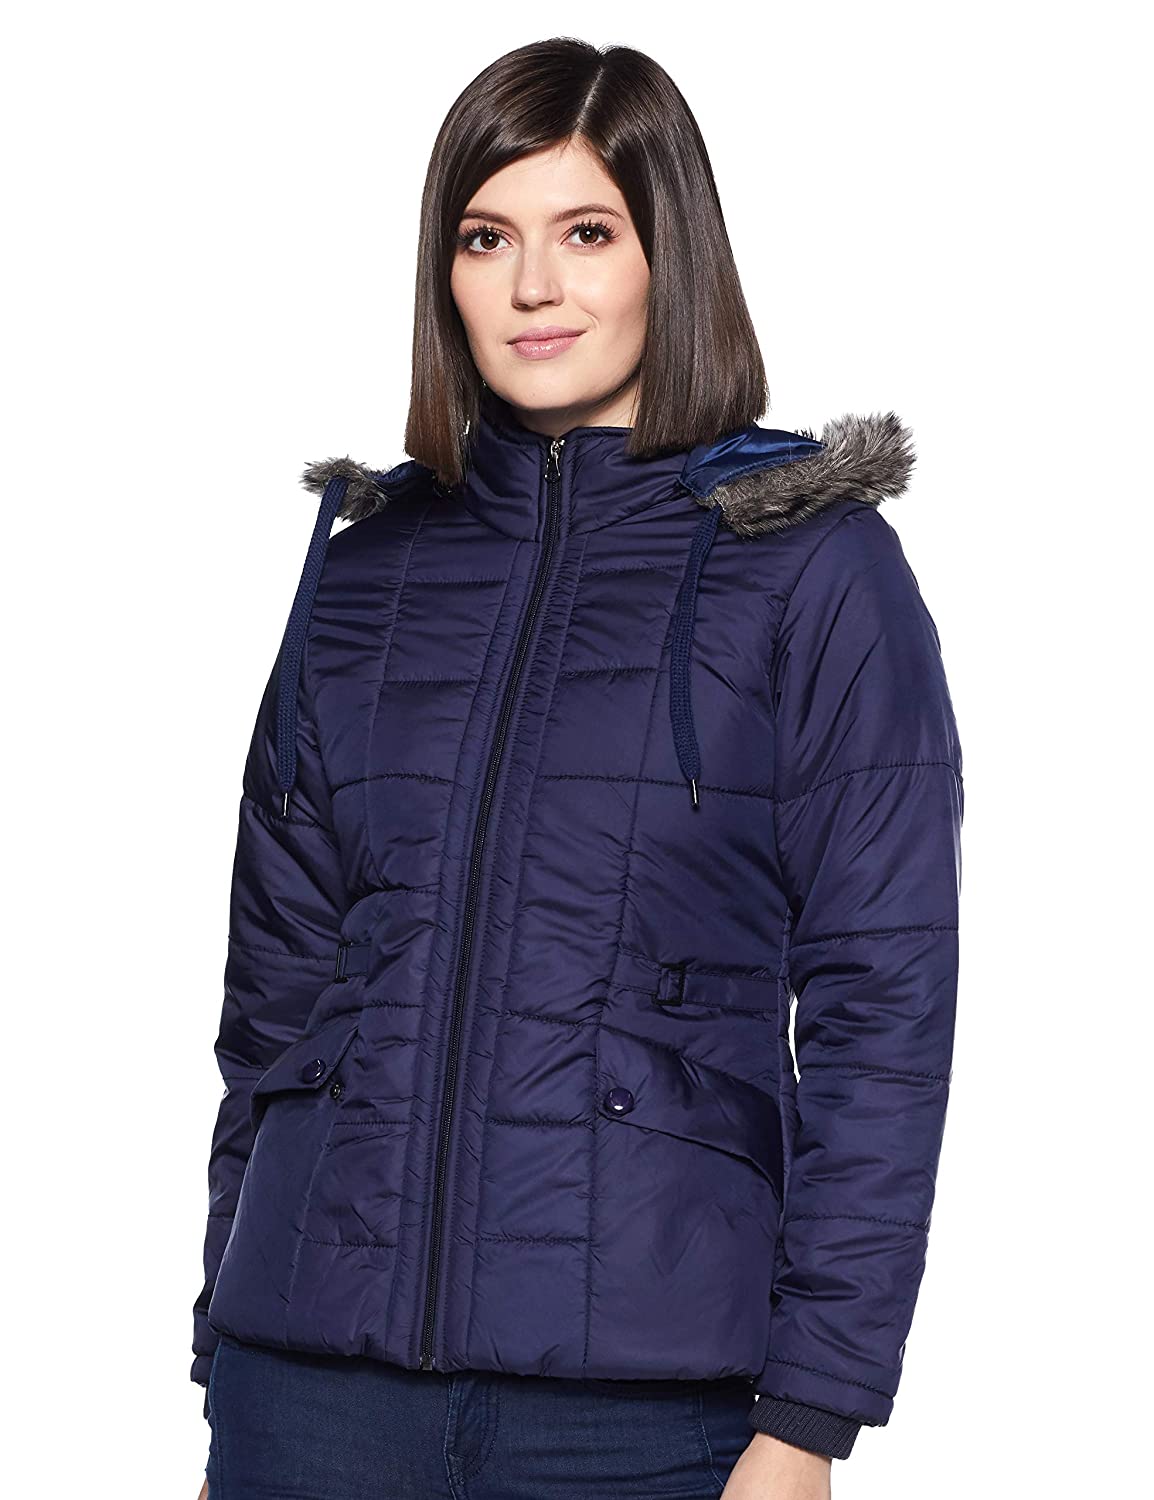 Full Sleeve Casual Jackets Ladies Winter Jacket at Rs 490 in Ludhiana